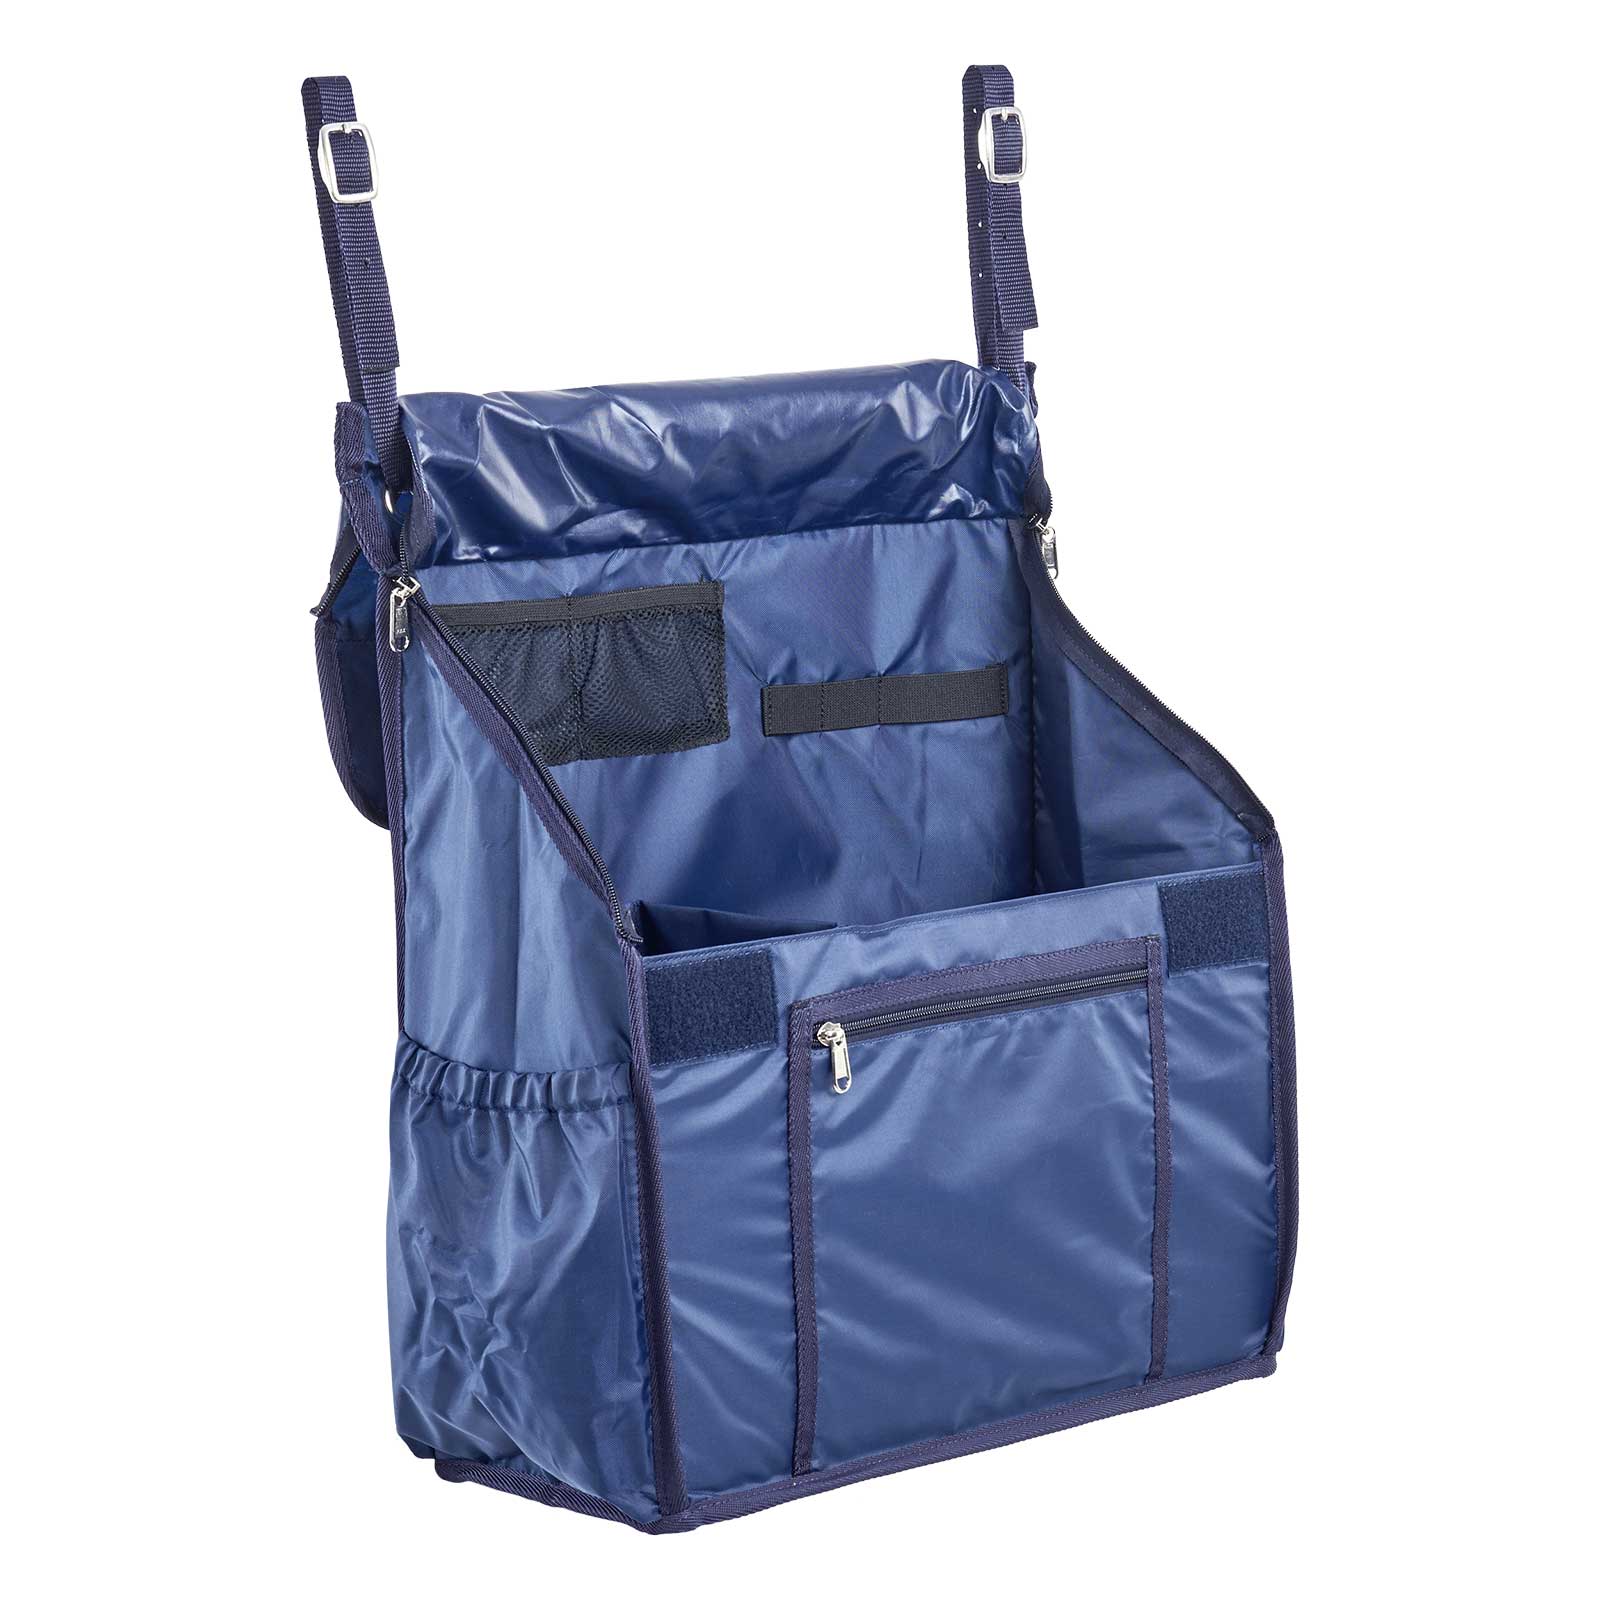 Busse Stable Bag Small RIO navy